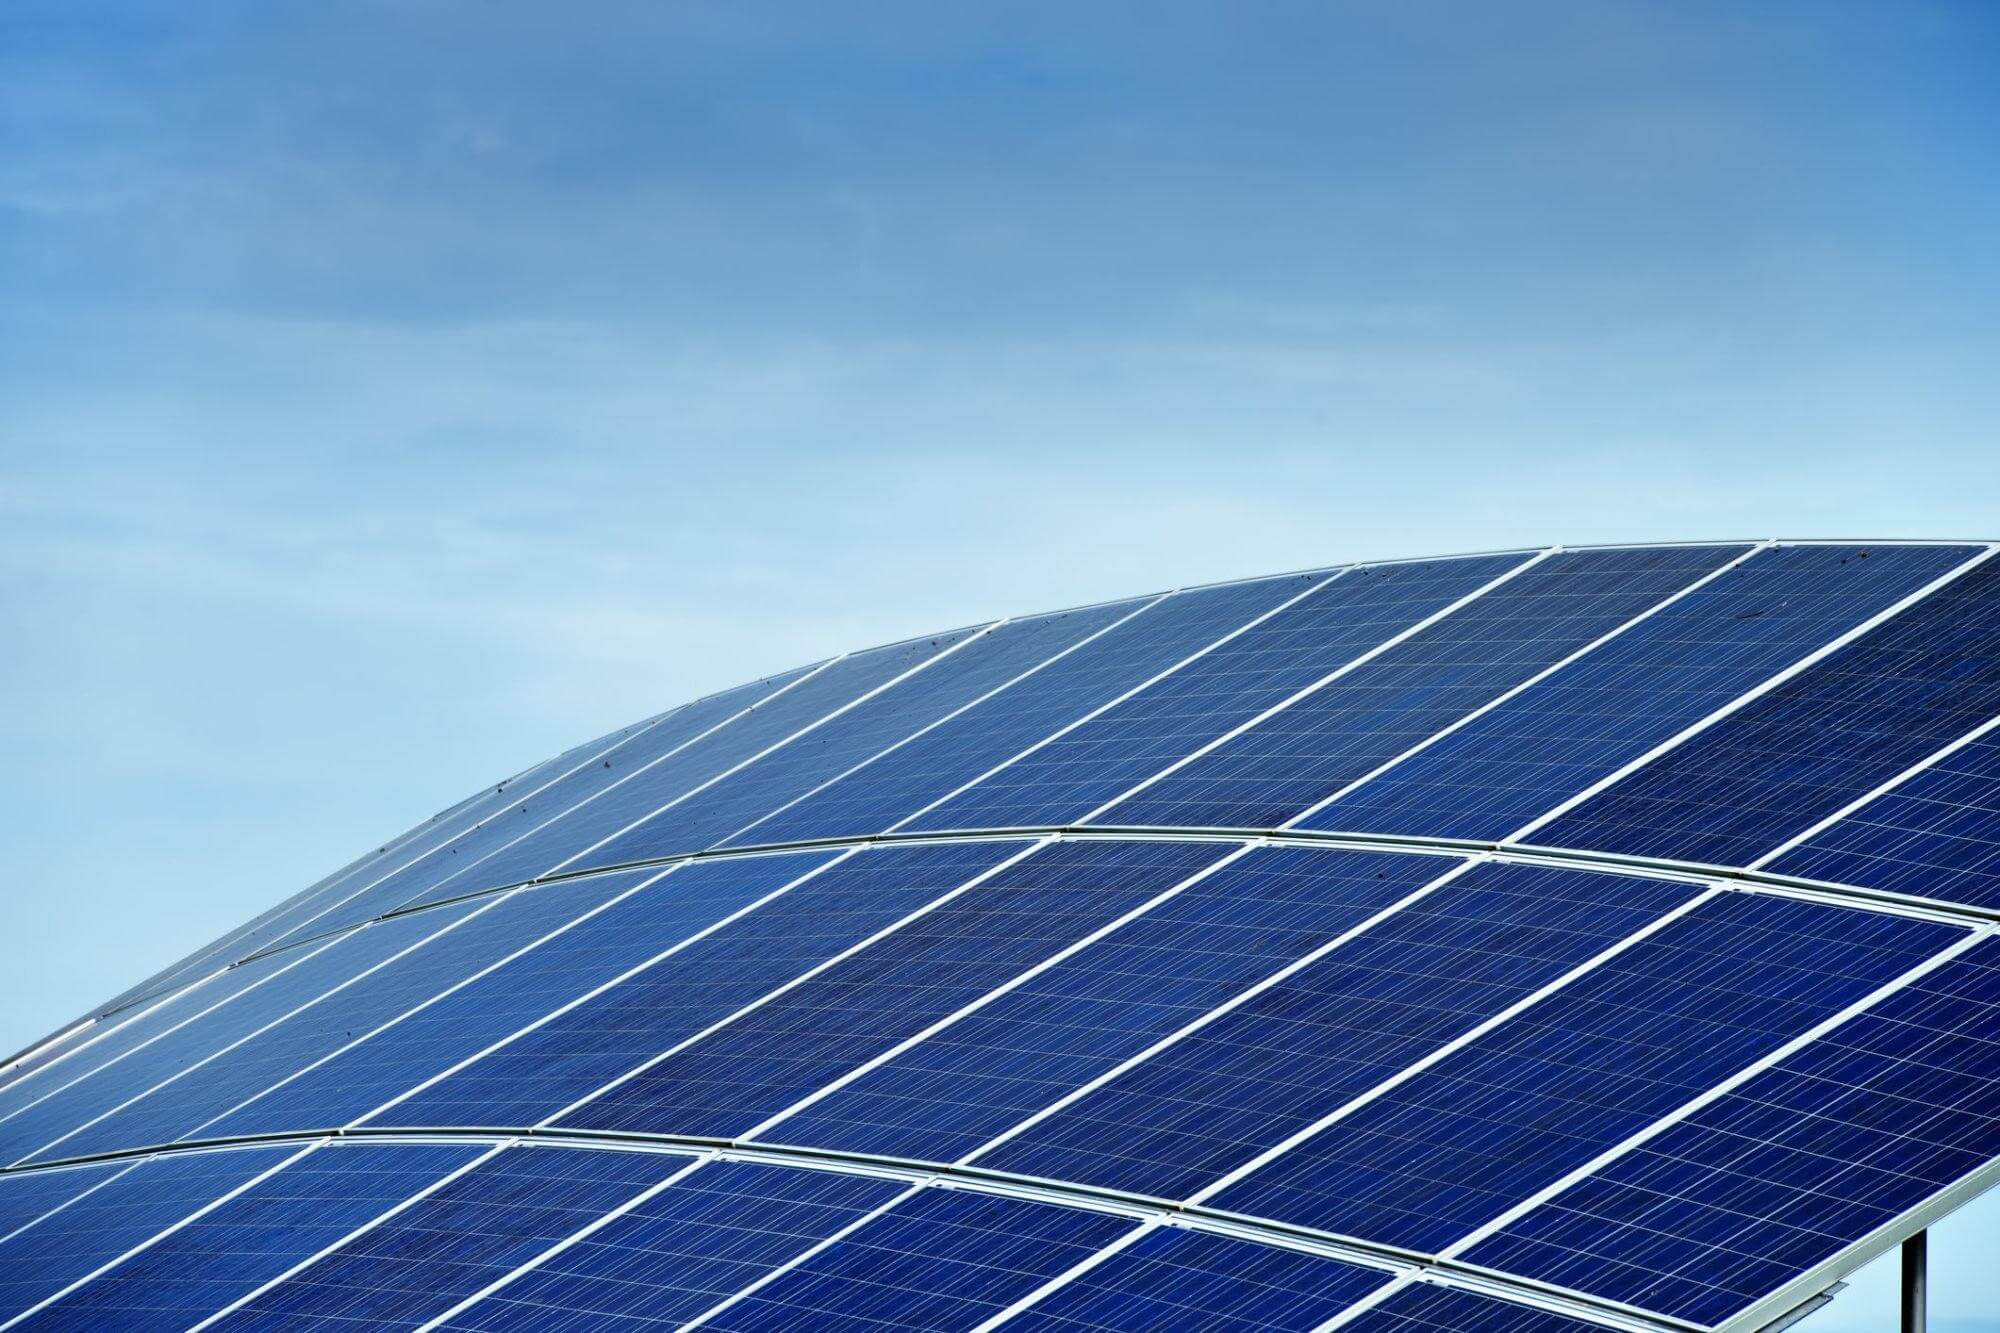 How solar panels have positively impacted the environment in Dallas